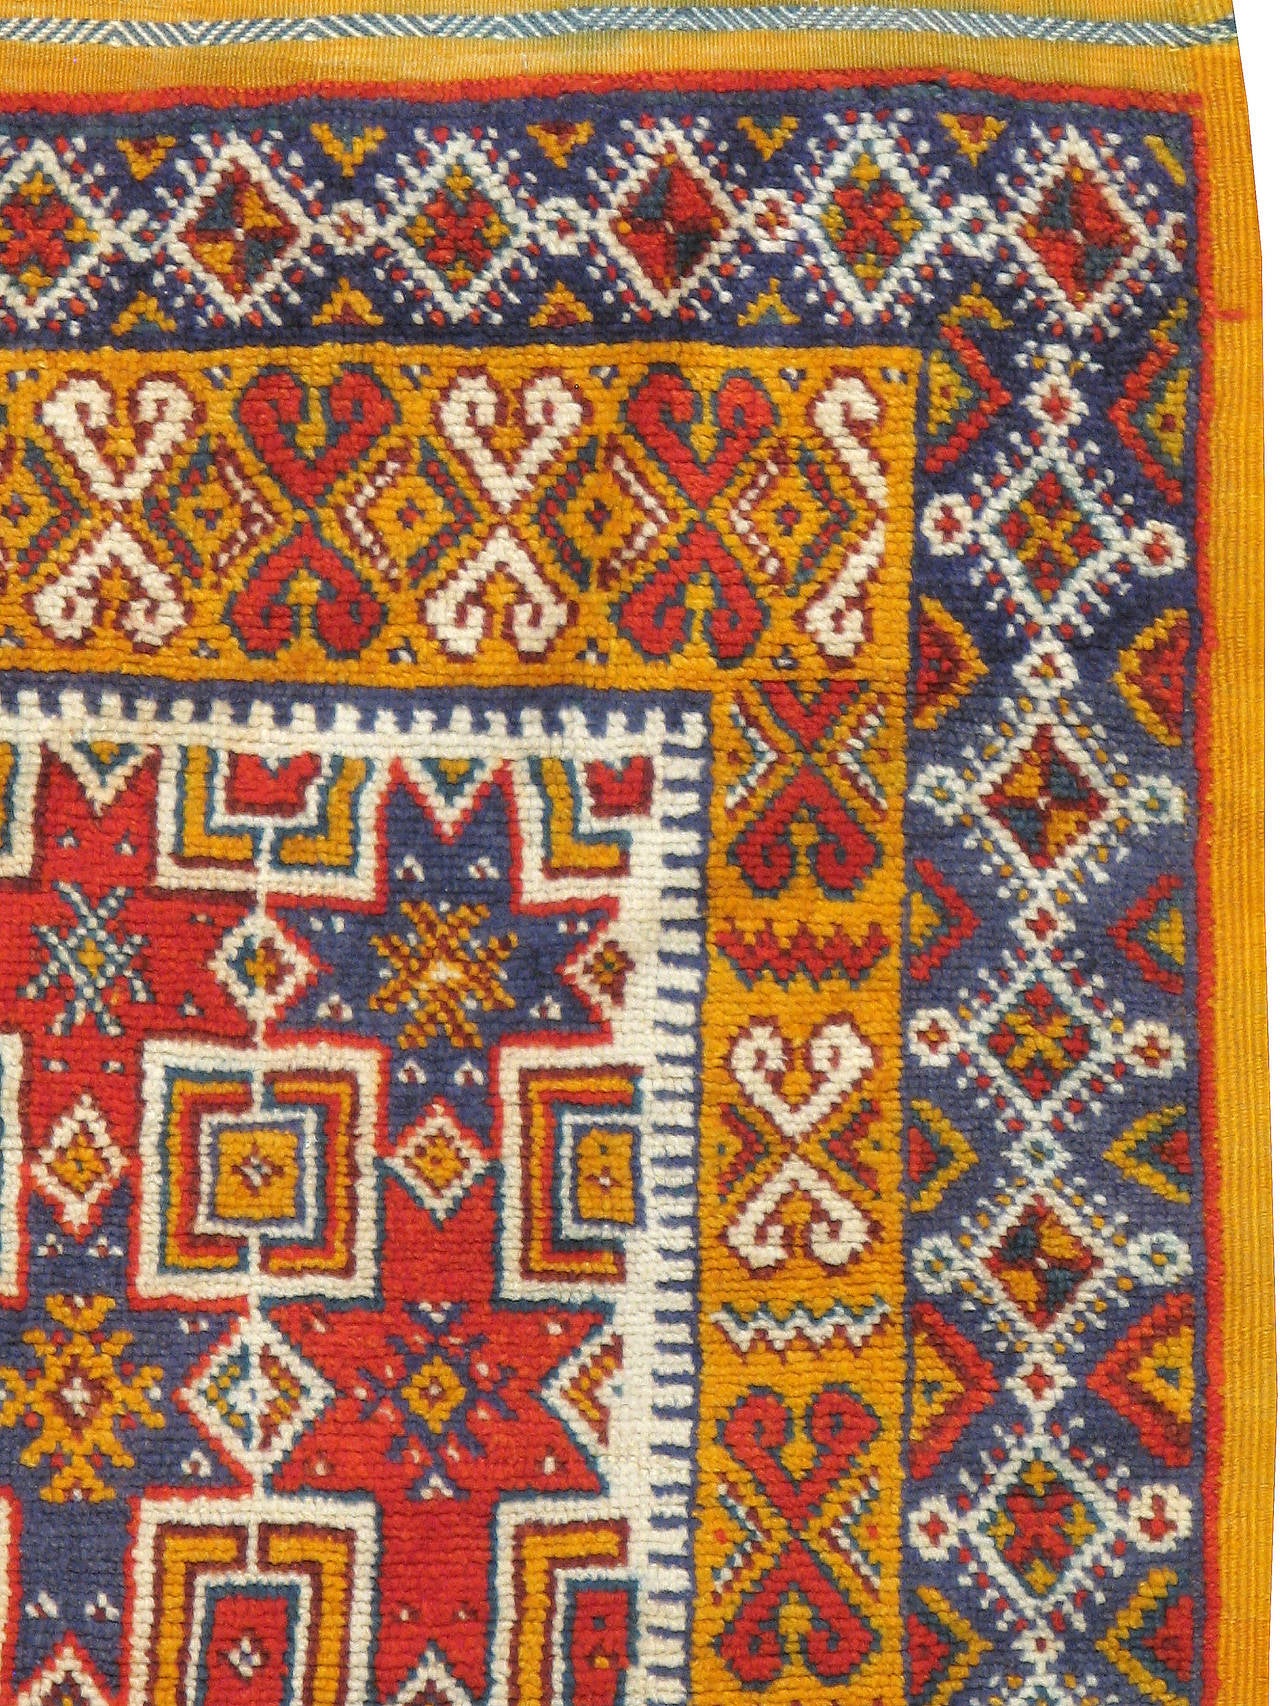 A modern Moroccan carpet from the fourth quarter of the 20th century.